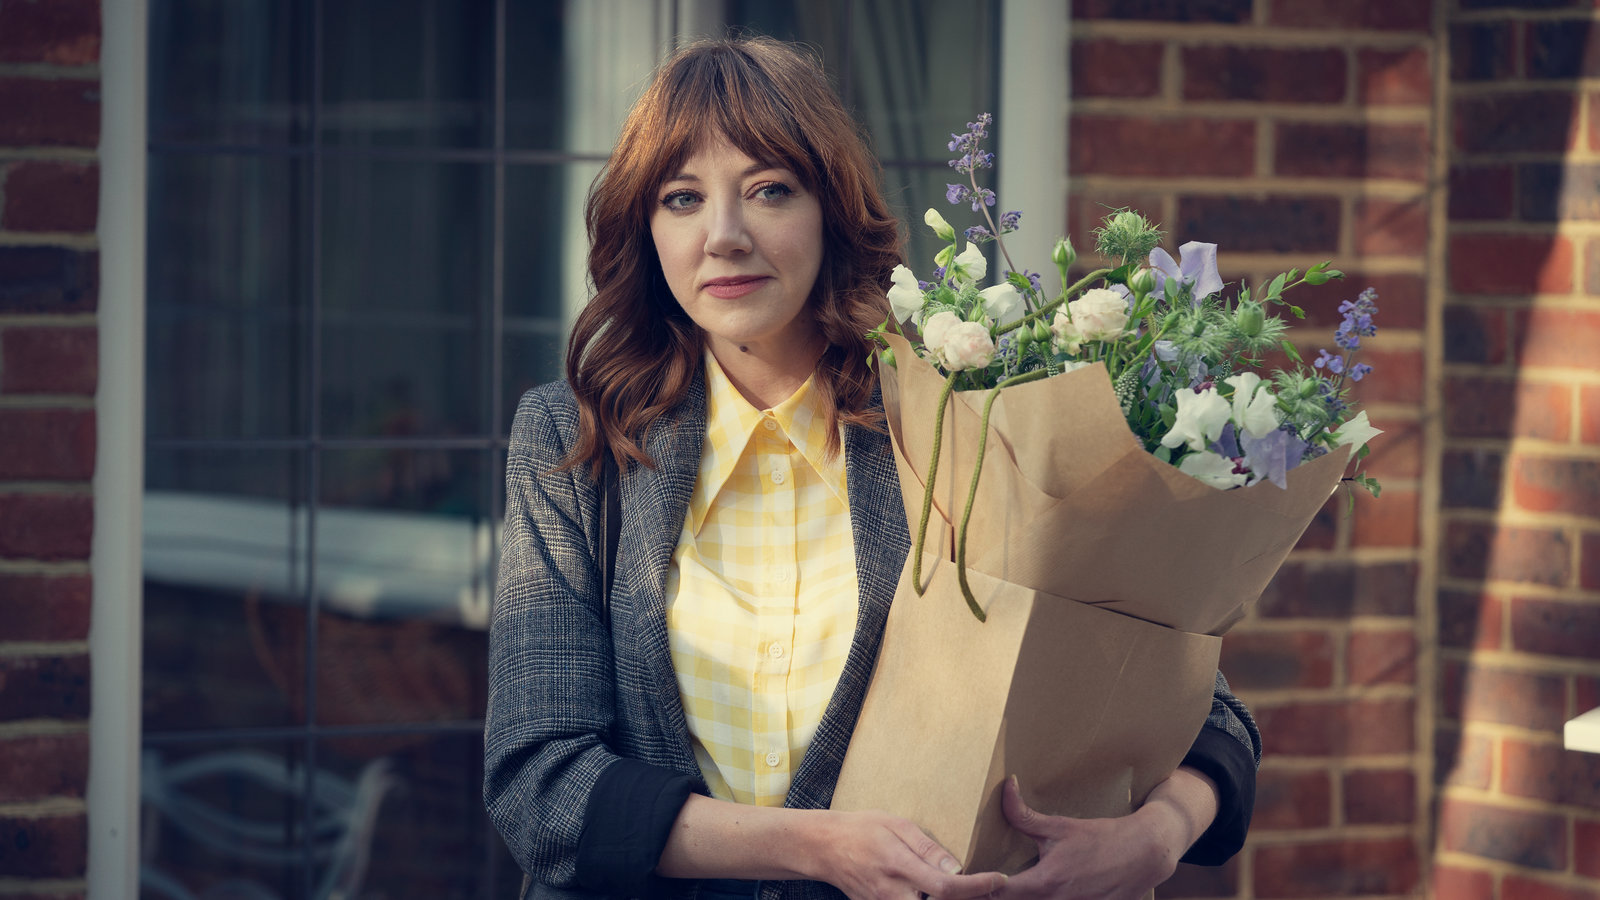 Diane Morgan embraces her natural wrinkles and wants to look ugly for a character